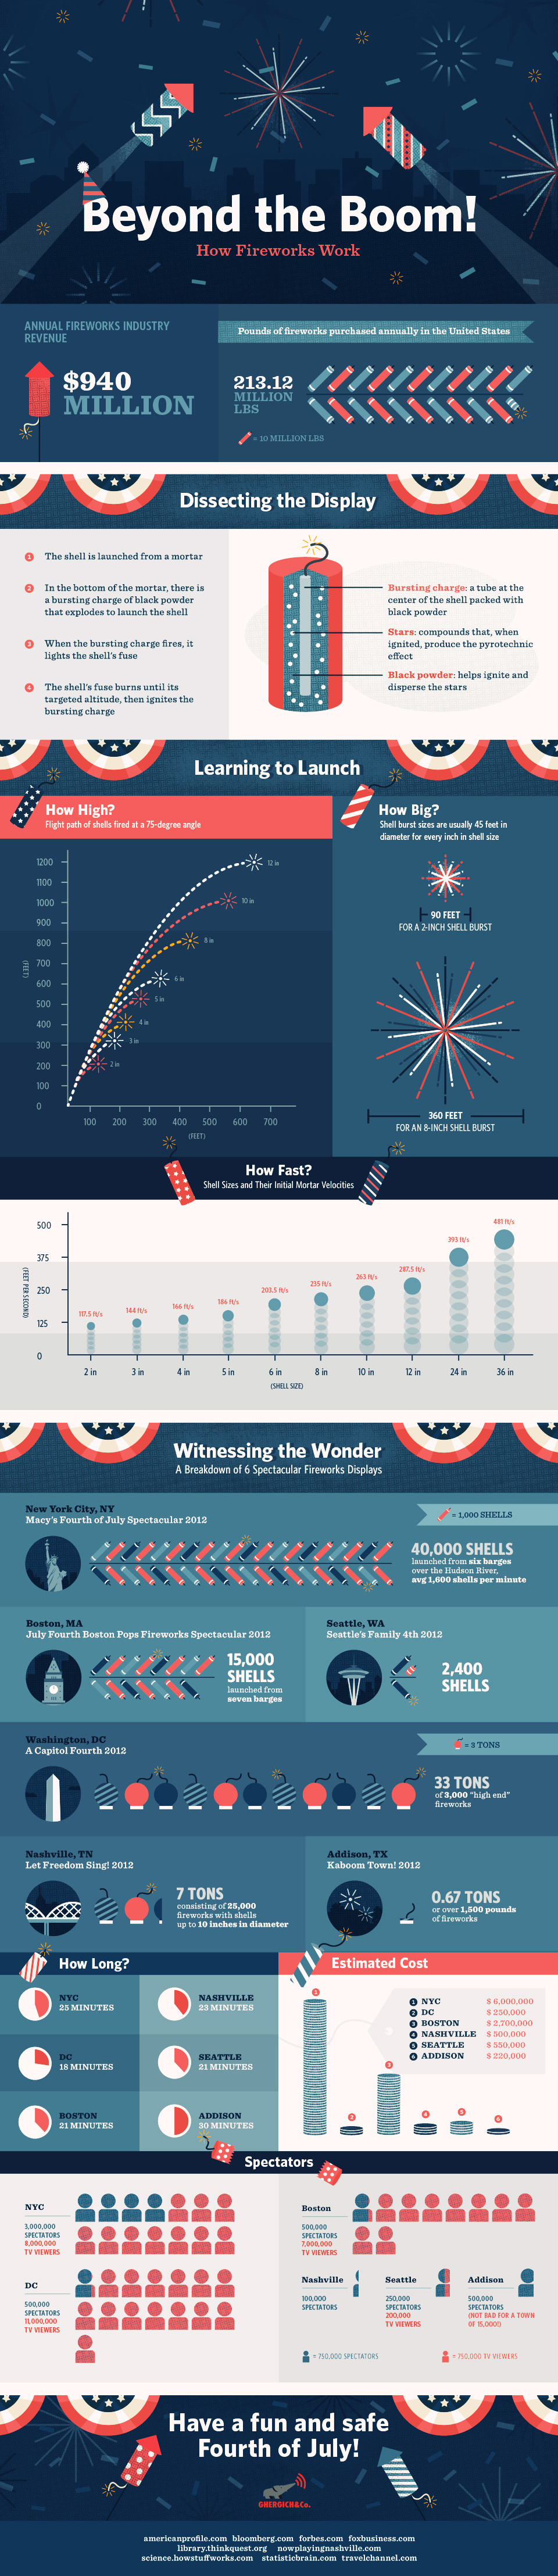 Beyond the BOOM: How Fireworks Work